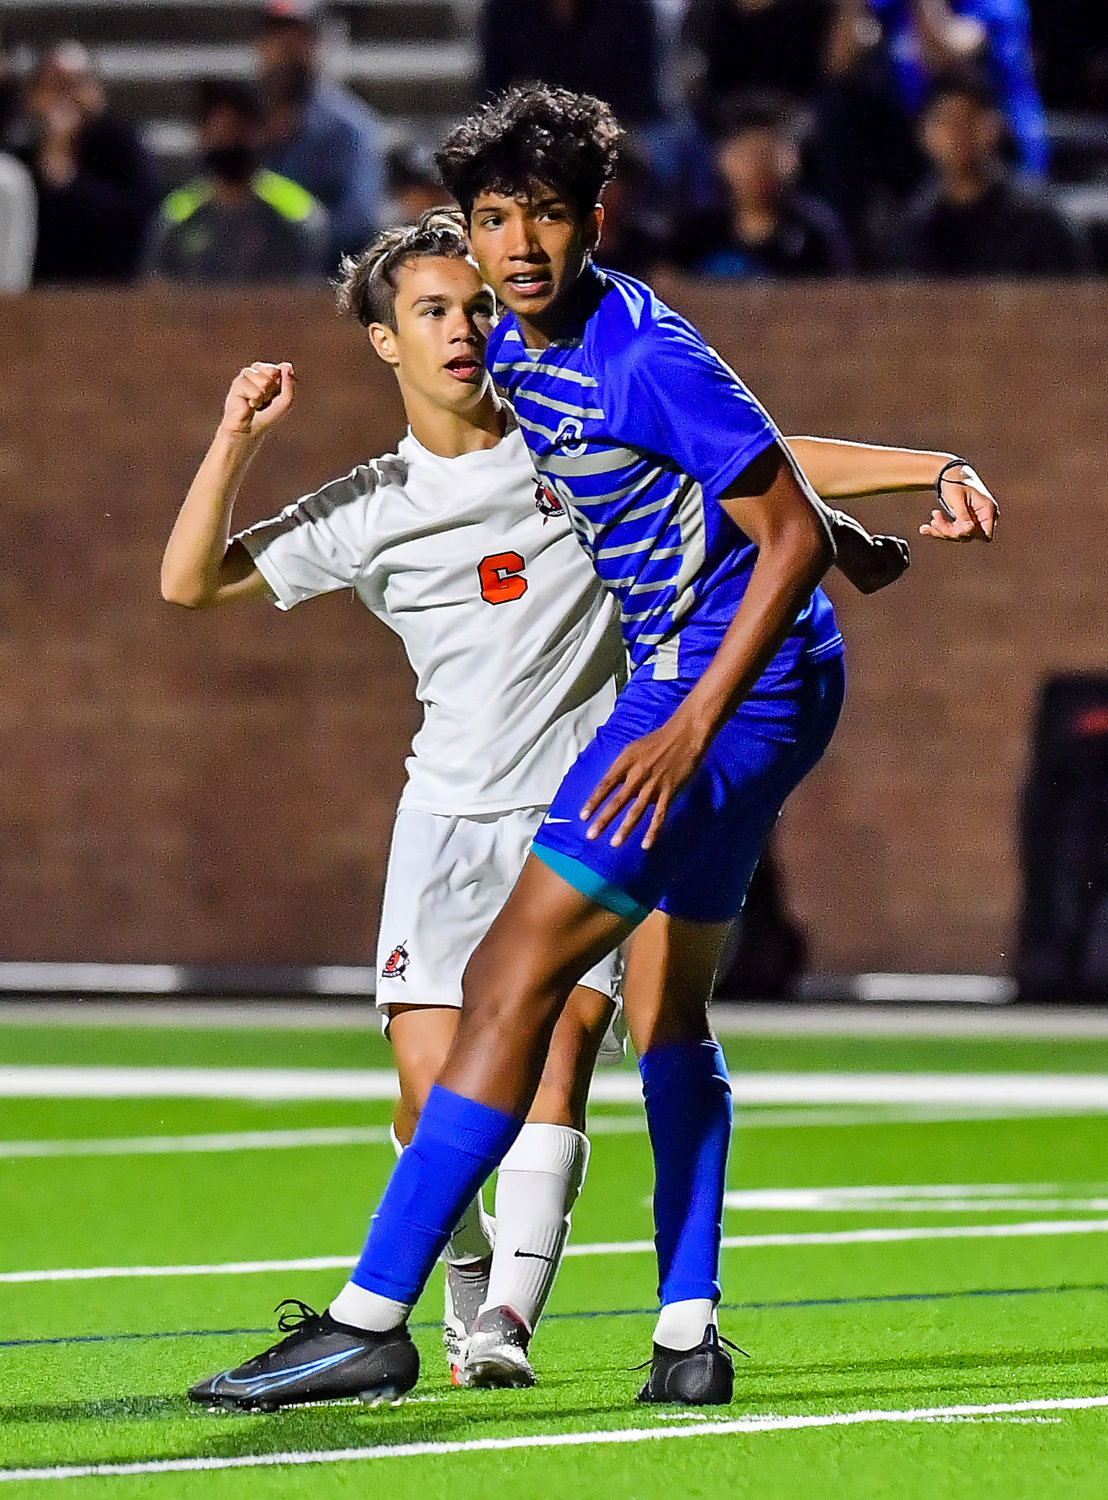 April 1, 2022: Seven Lakes kortay koc #6 gives a fist pump after scoring as Katy Taylors Erick Arellano #26 looks on during Regional Quarterfinal soccer playoff, Seven Lakes vs Katy Taylor at Rhode Stadium. (Photo by Mark Goodman / Katy Times)